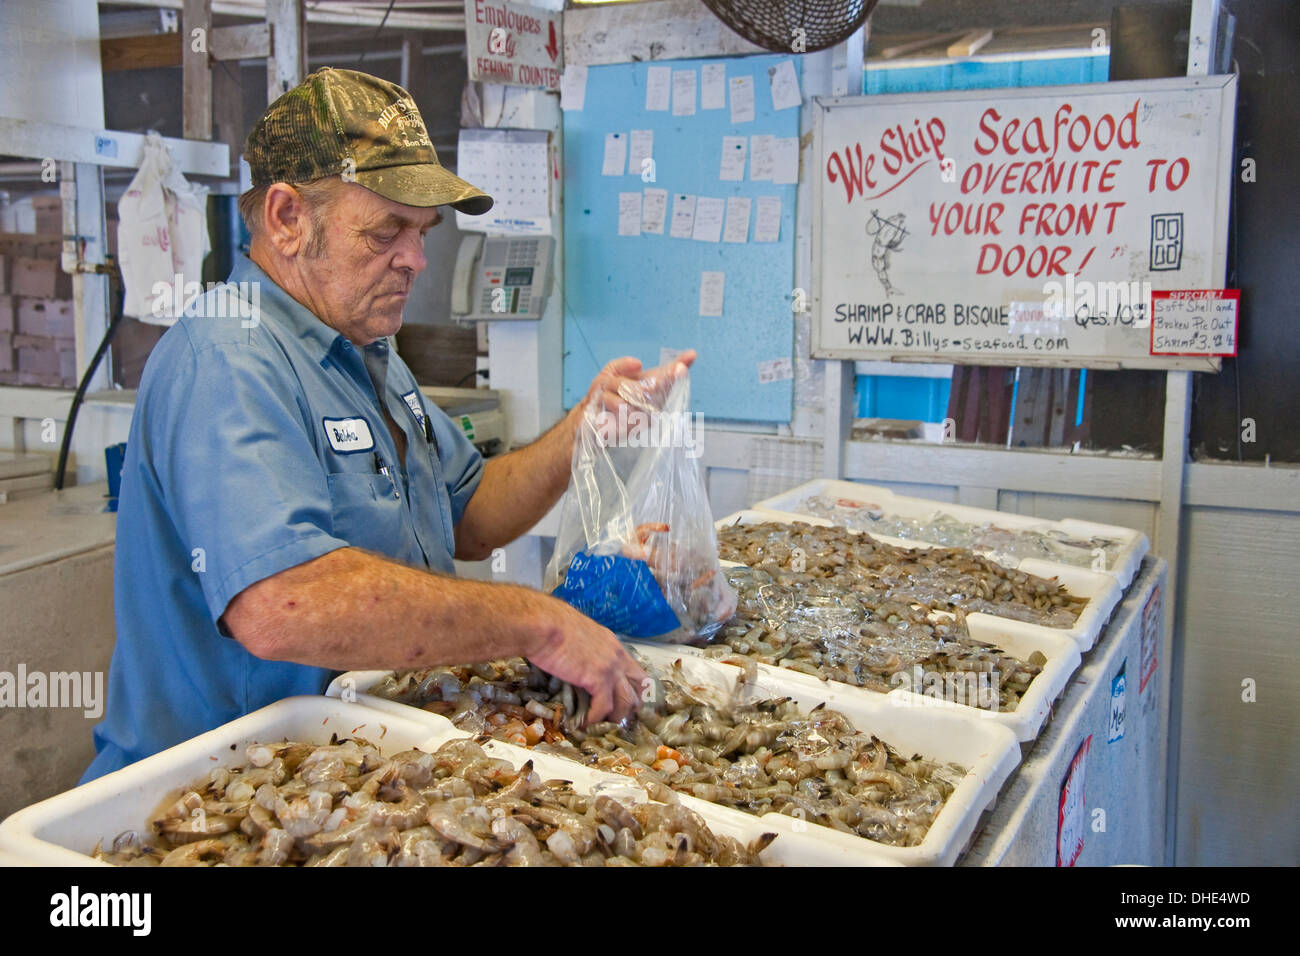 Billy's Seafood sur Alabama Gulf Coast. Banque D'Images